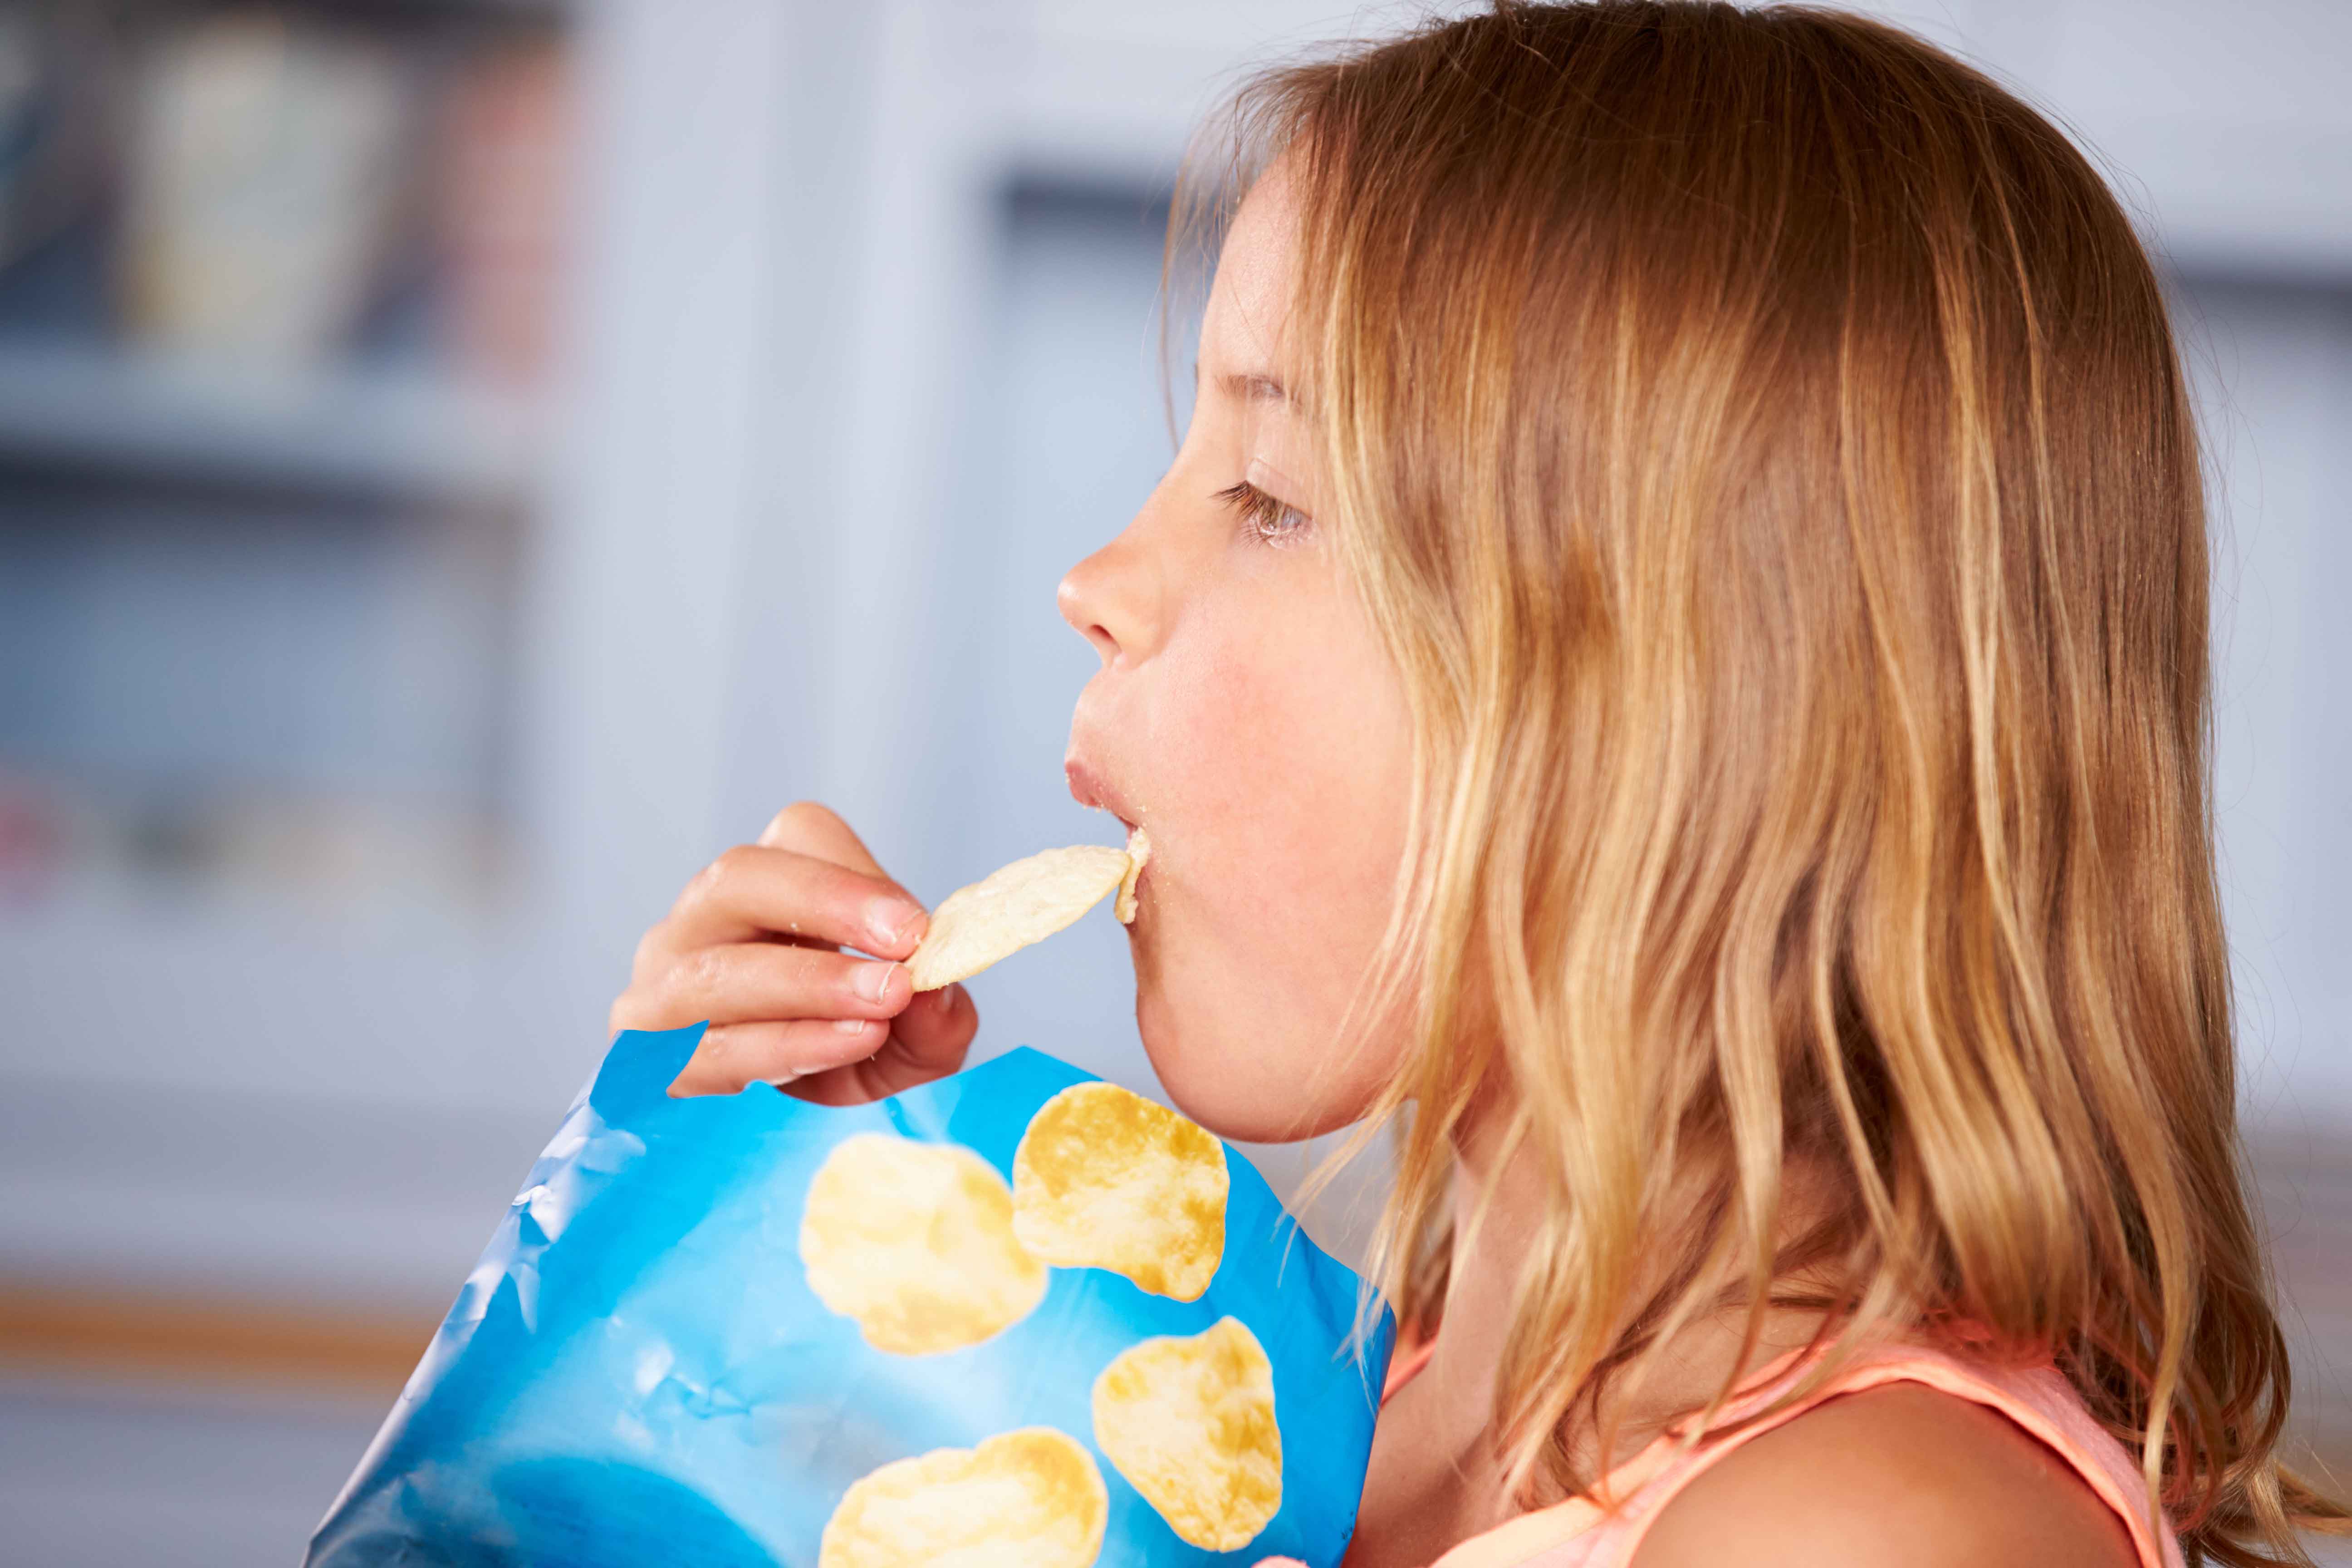 Girl-Snacking-on-Chips. How Snacking is contributing to our Nation's Obesity Epidemic